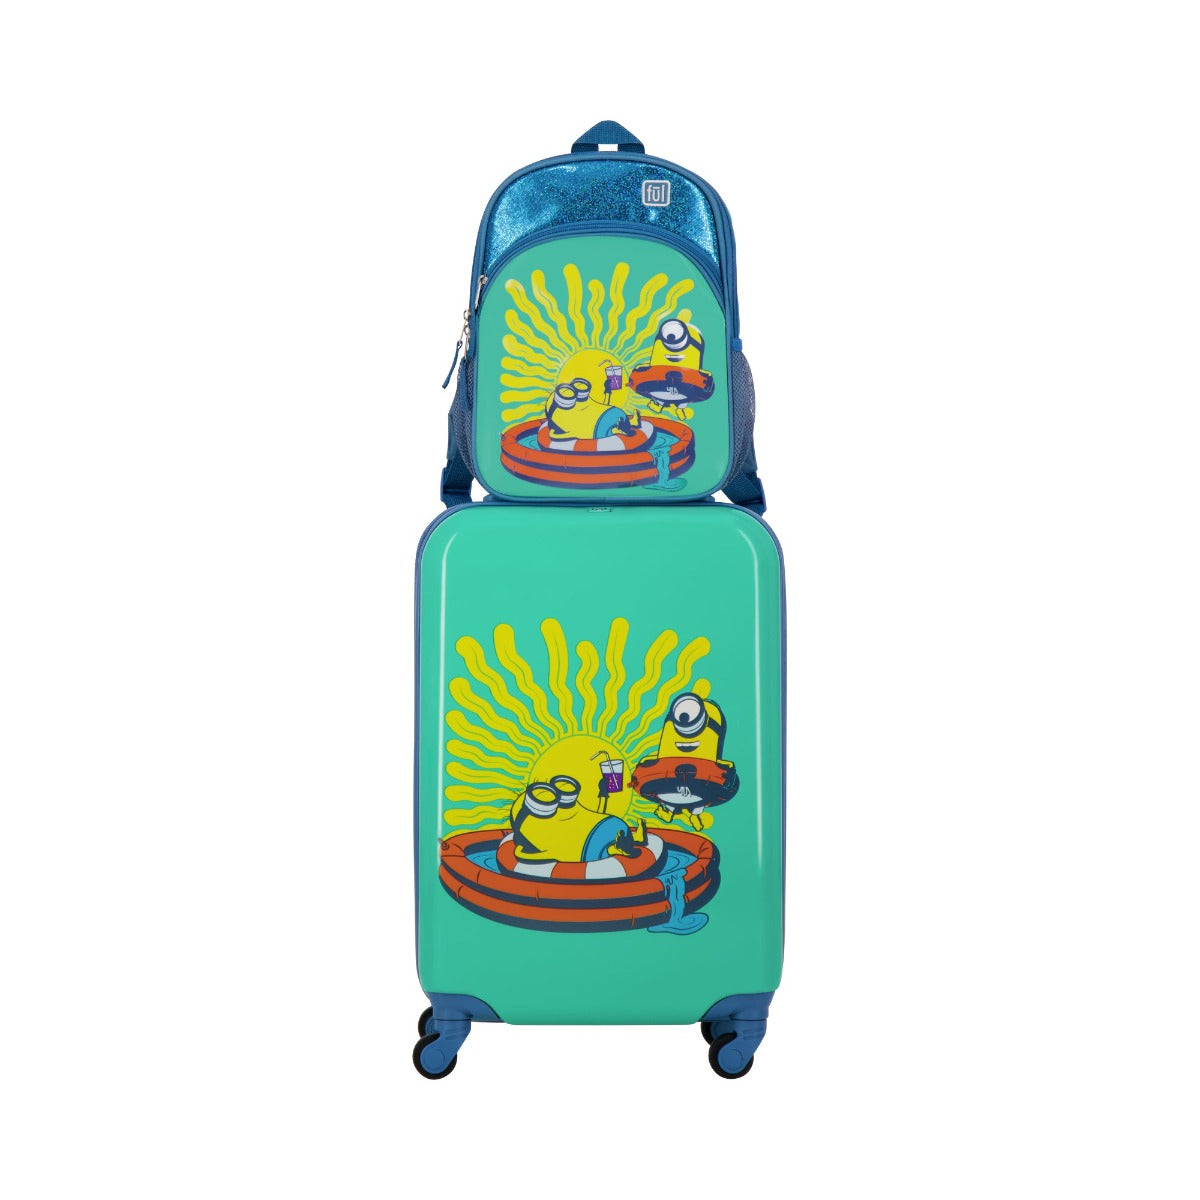 Ful Minions Vacation matching 2 piece set with carry-on 21" suitcase and 13" backpack